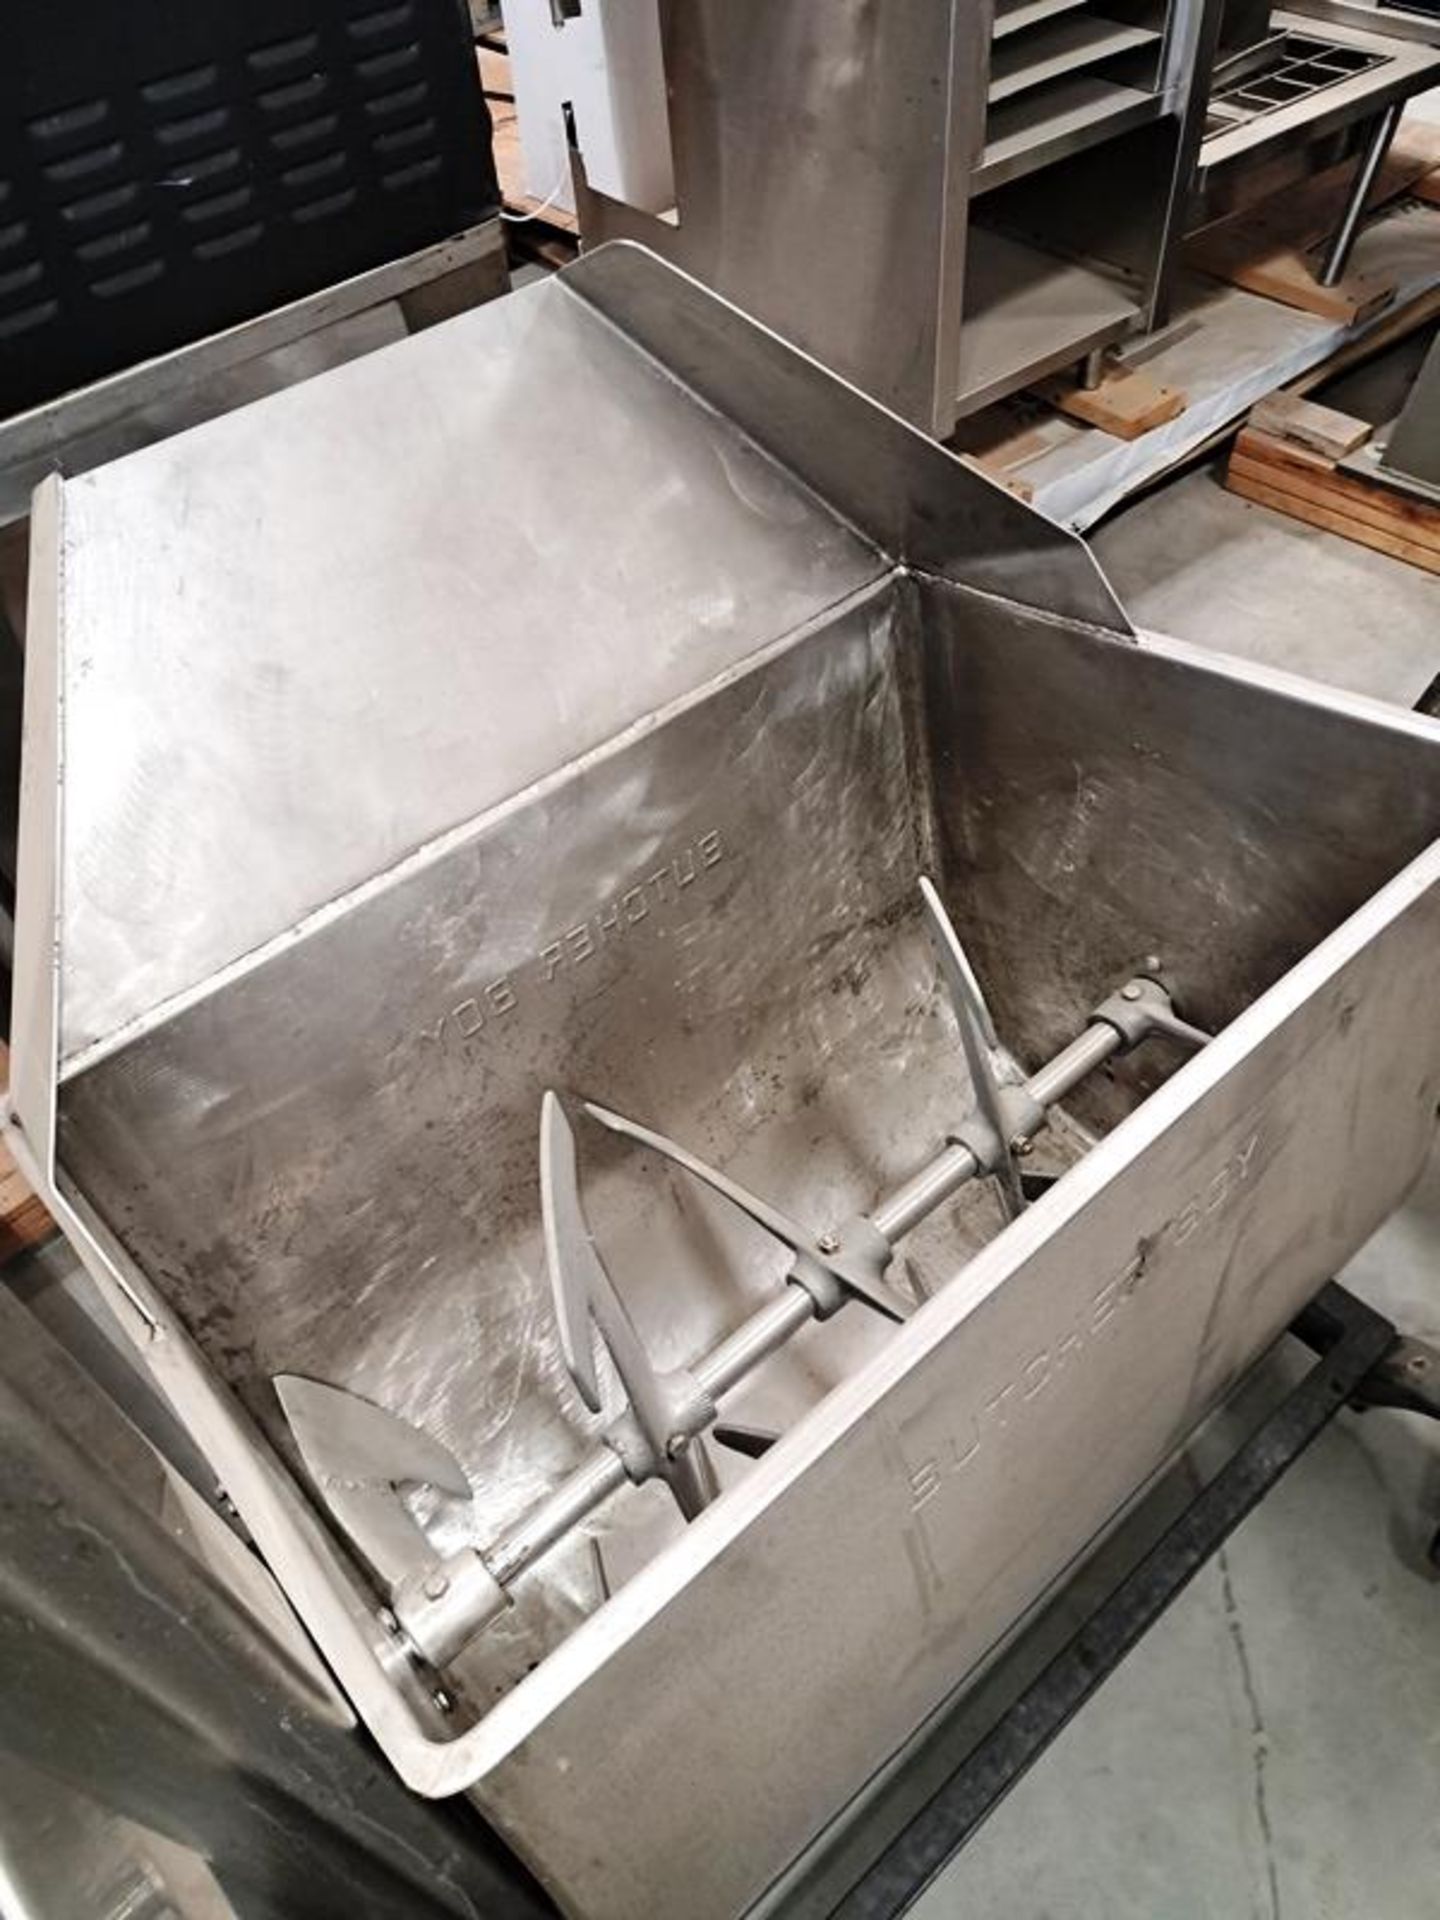 Butcher Boy Mdl. 250H Stainless Steel Paddle Mixer, Ser. #340, 20" wide X 31" long X 23" deep bowl - Image 3 of 3